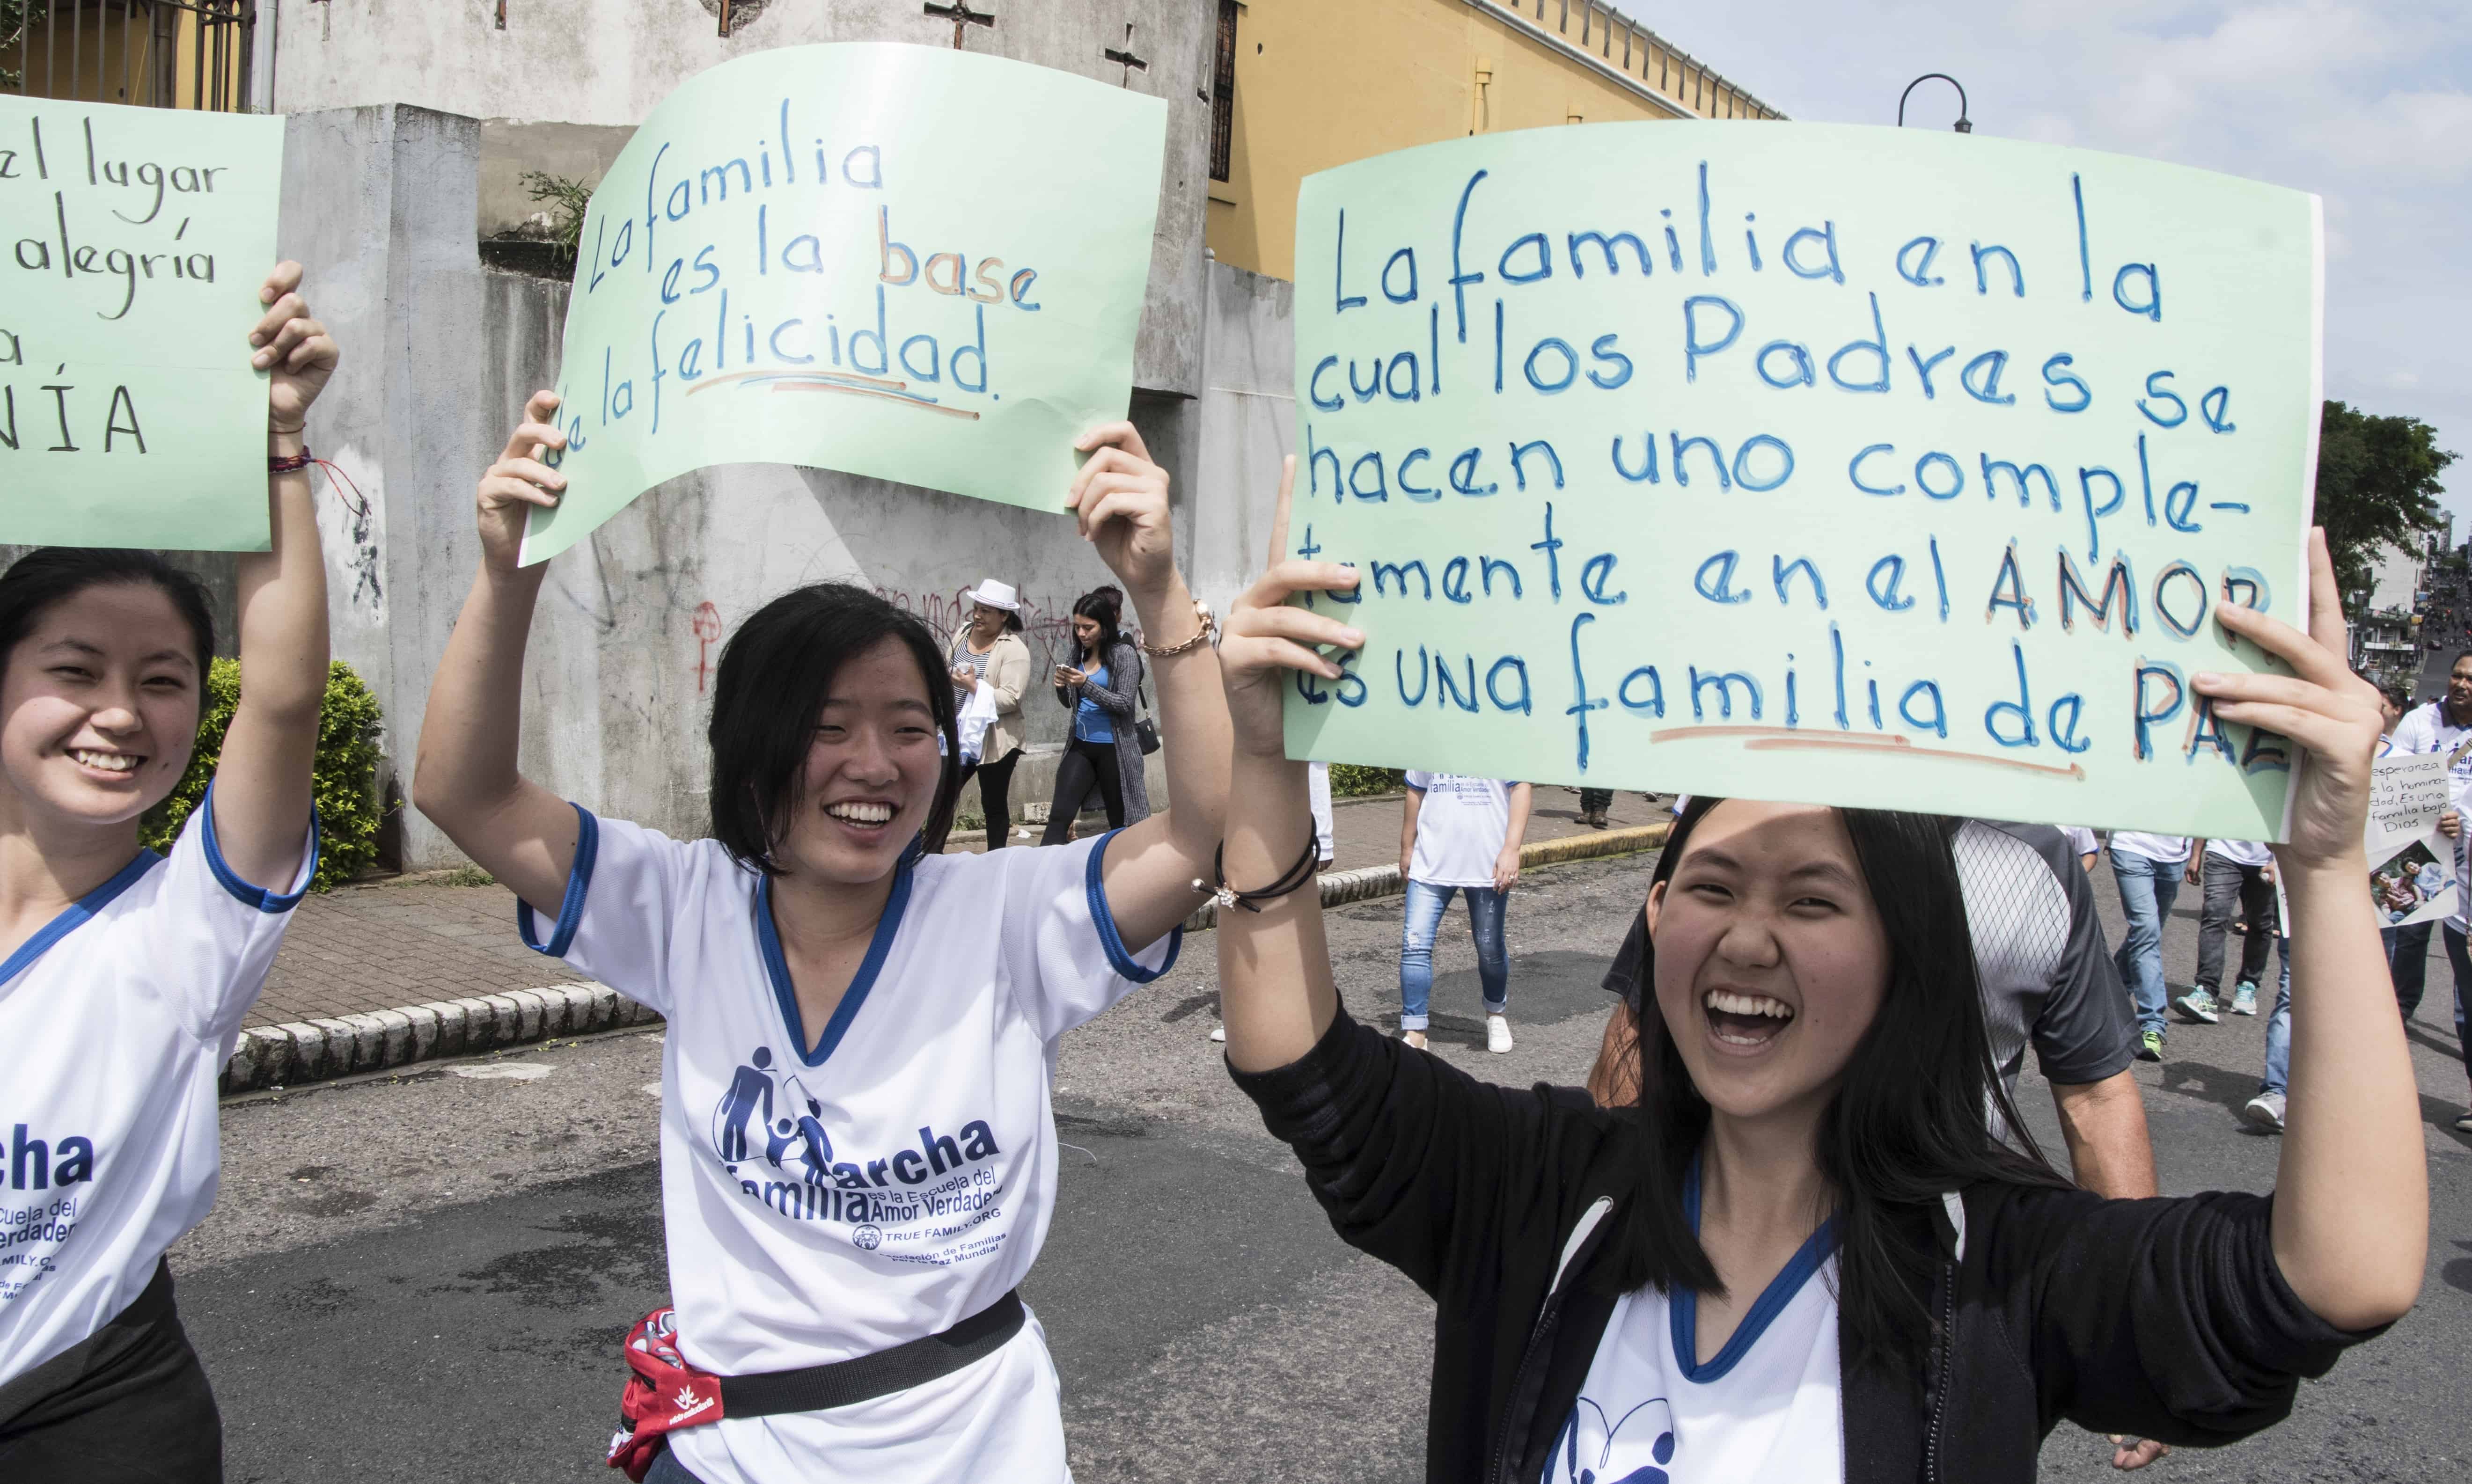 Women hold signs in favor of the traditional family during a march in San José, on July 15, 2018.